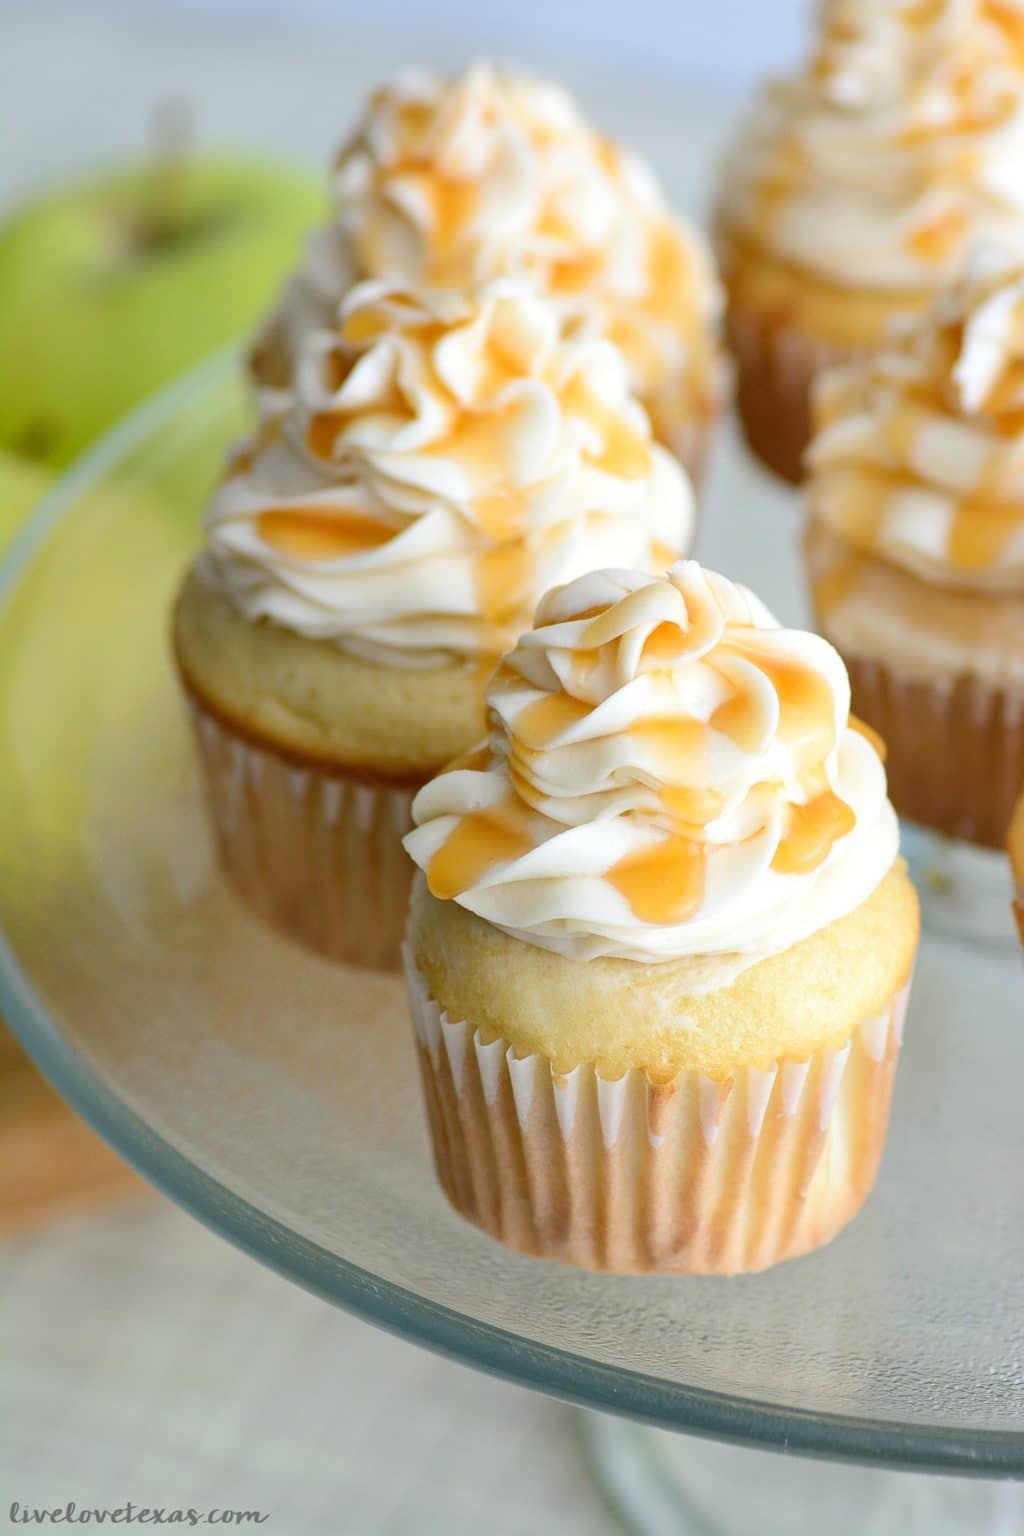 When you think of fall, what flavors come to mind? Apples and caramel are two of my favorites and combined in this easy Caramel Apple Cupcakes recipe! #cupcake #cupcakes #easycupcakes #caramel #apple #caramelaple #fallcupcakes #cupcakerecipes #applerecipes #caramelrecipes #apple #recipe #recipes #fallrecipes #thanksgivingfood 